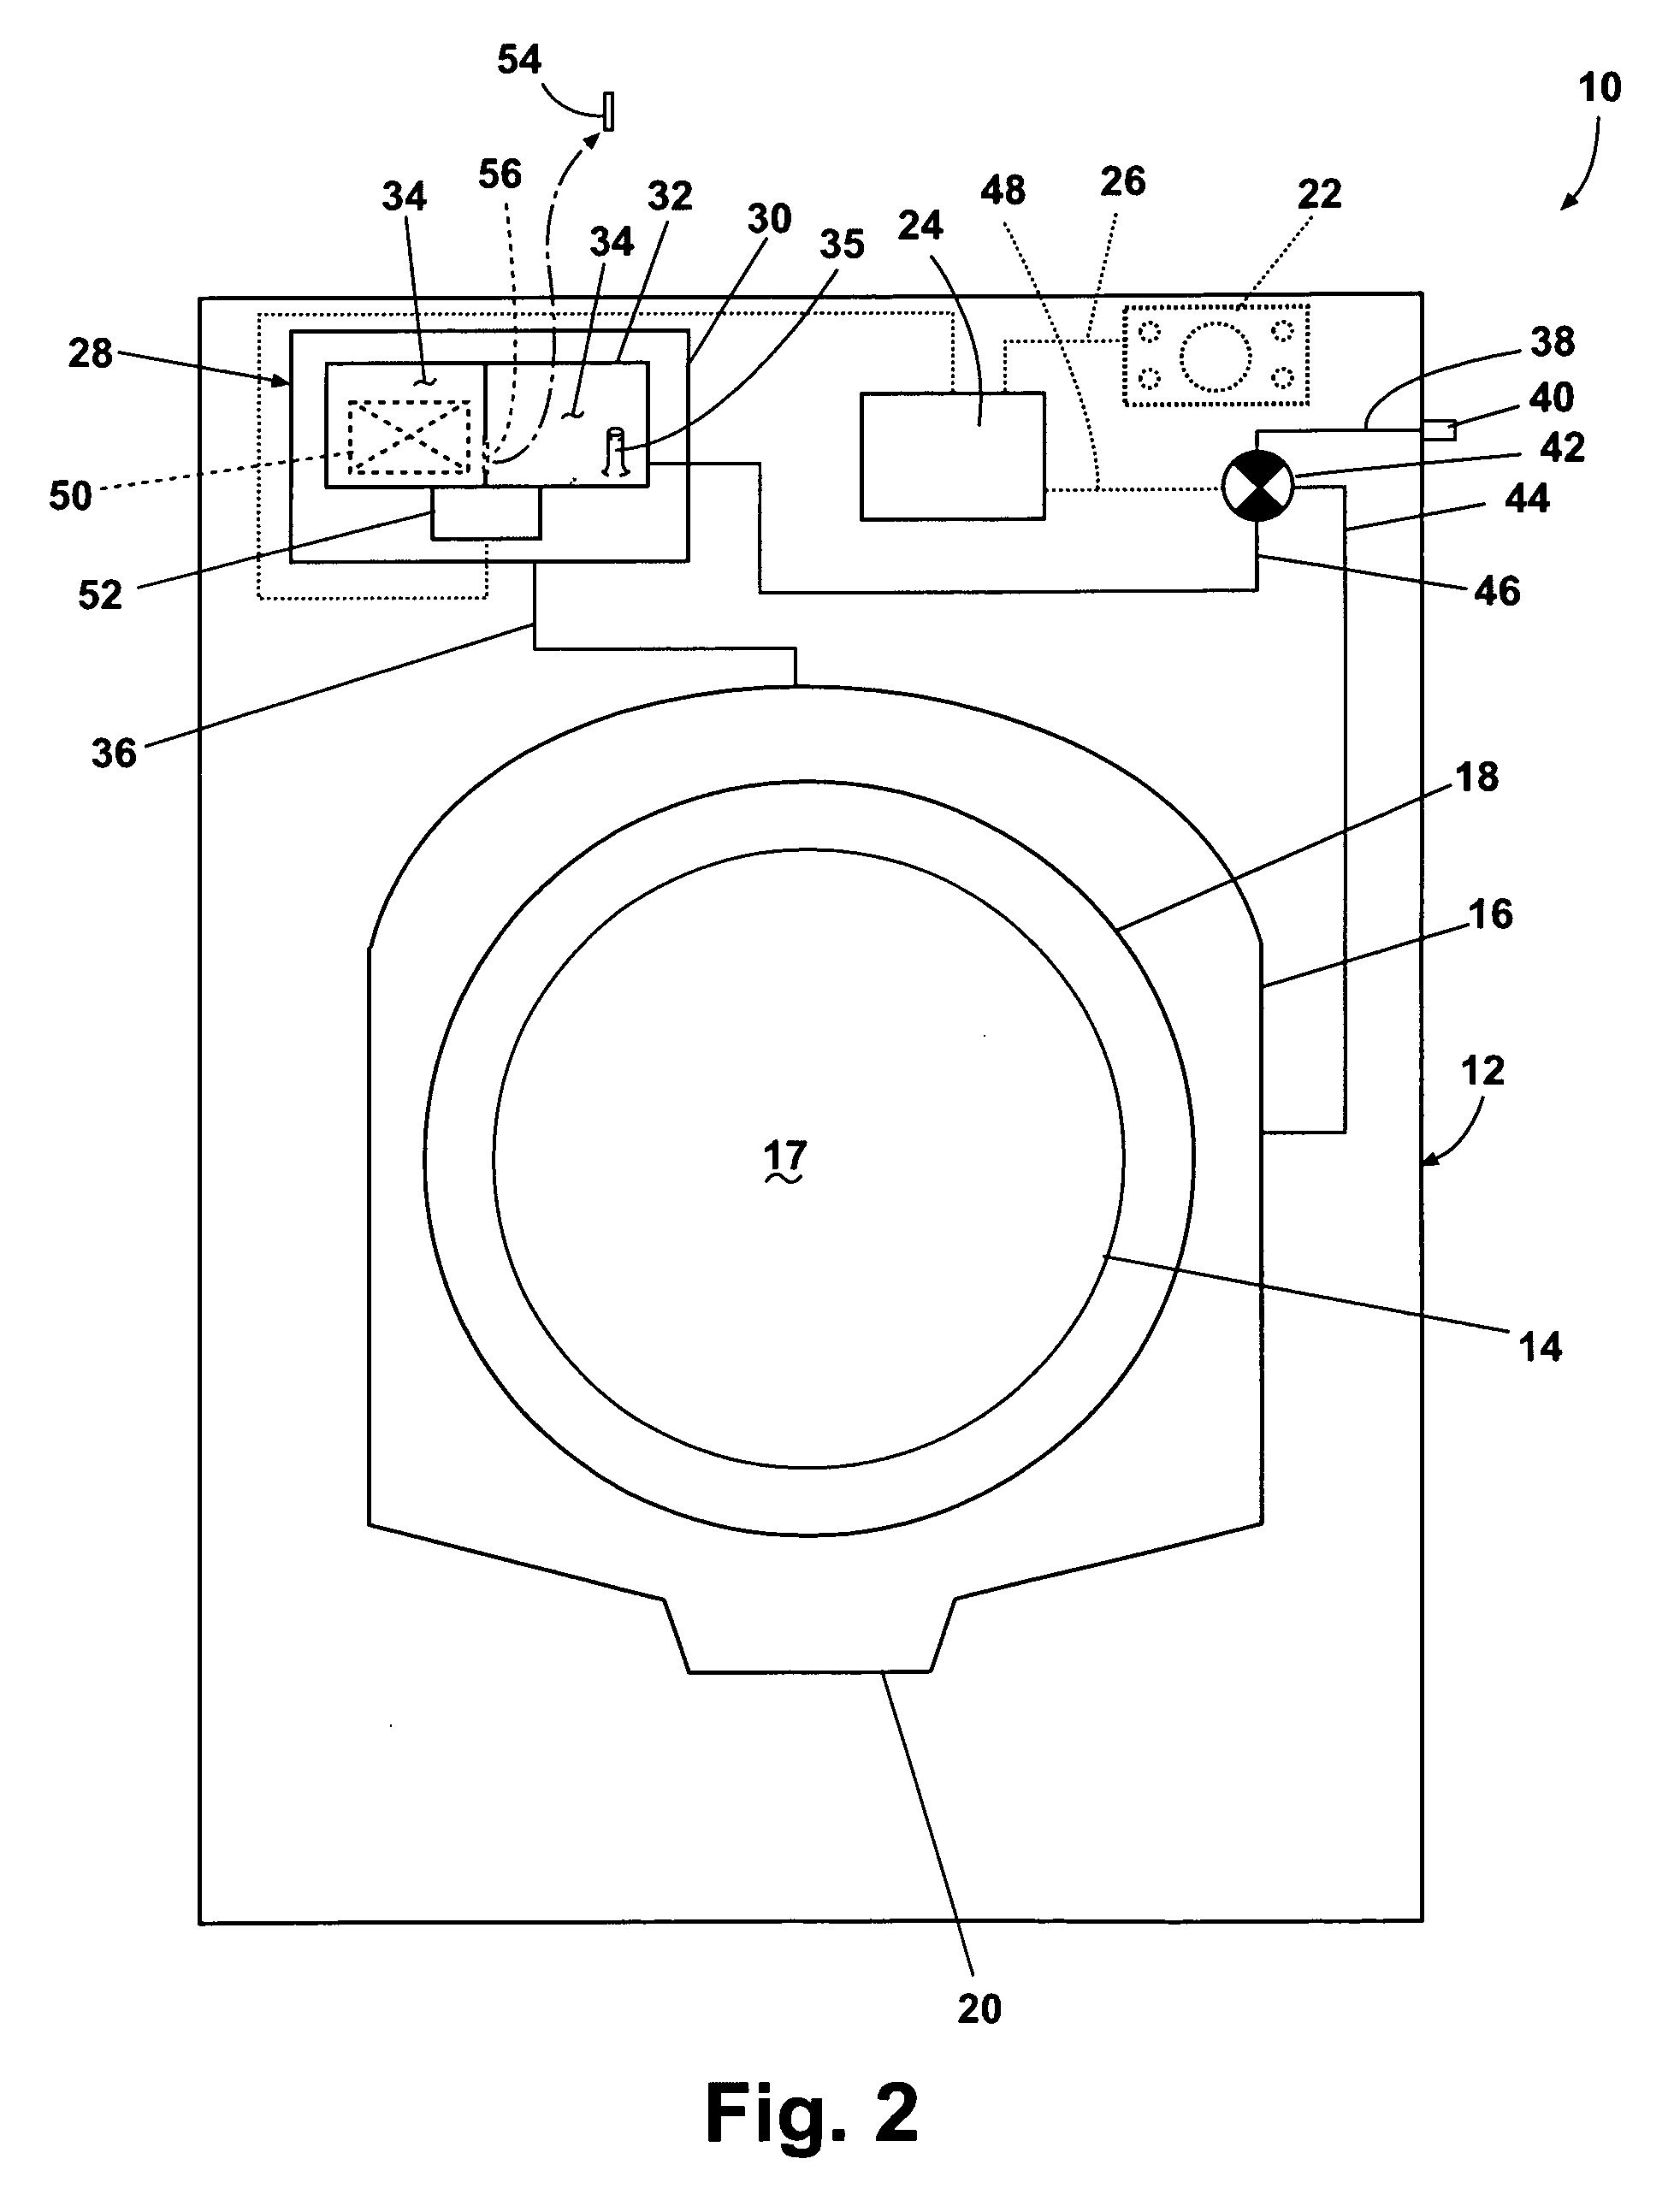 Method for converting a household cleaning appliance with a non-bulk dispensing system to a household cleaning appliance with a bulk dispensing system